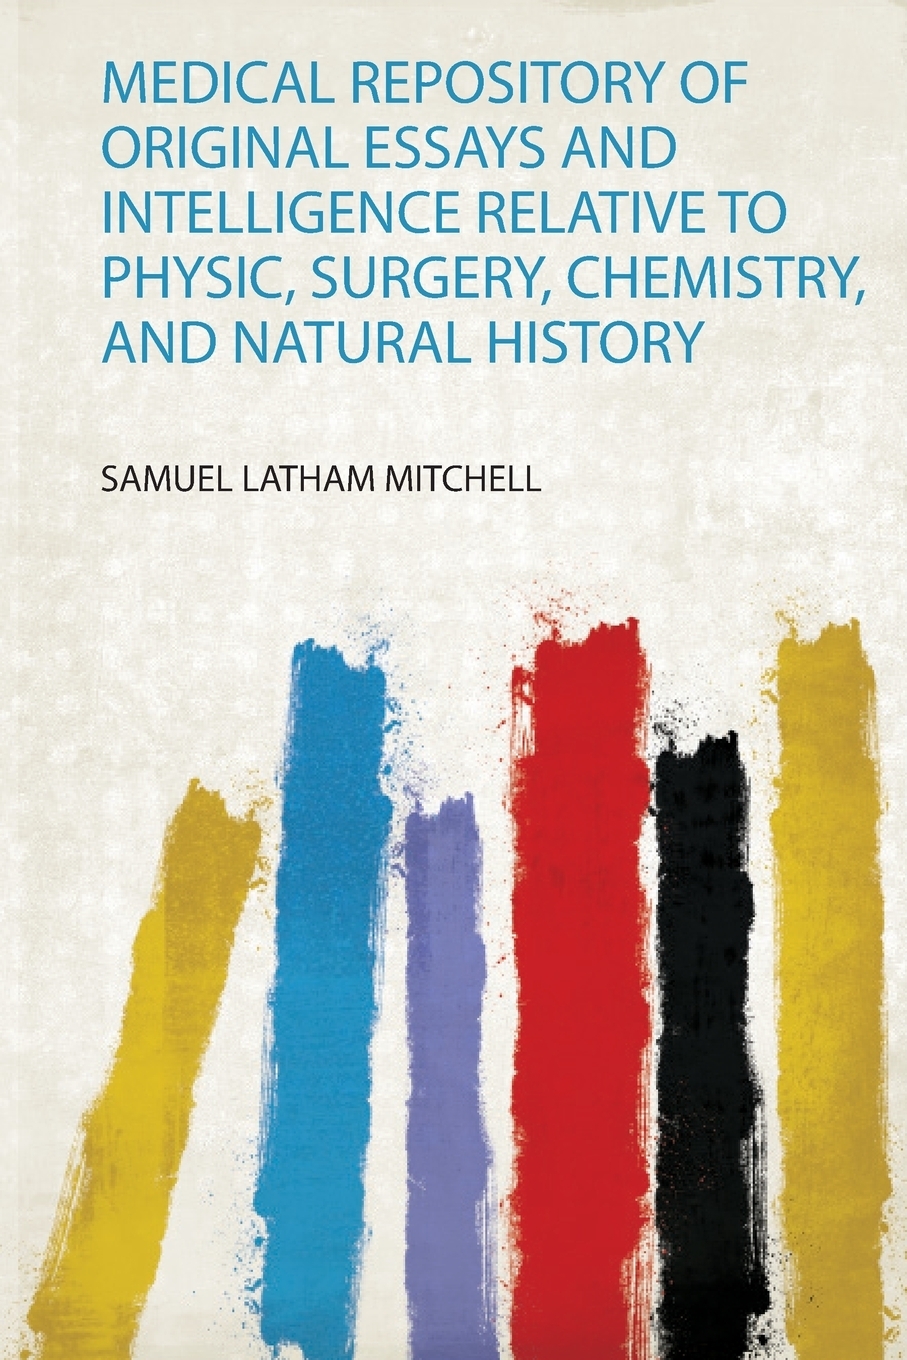 Medical Repository of Original Essays and Intelligence Relative to Physic, Surgery, Chemistry, and Natural History